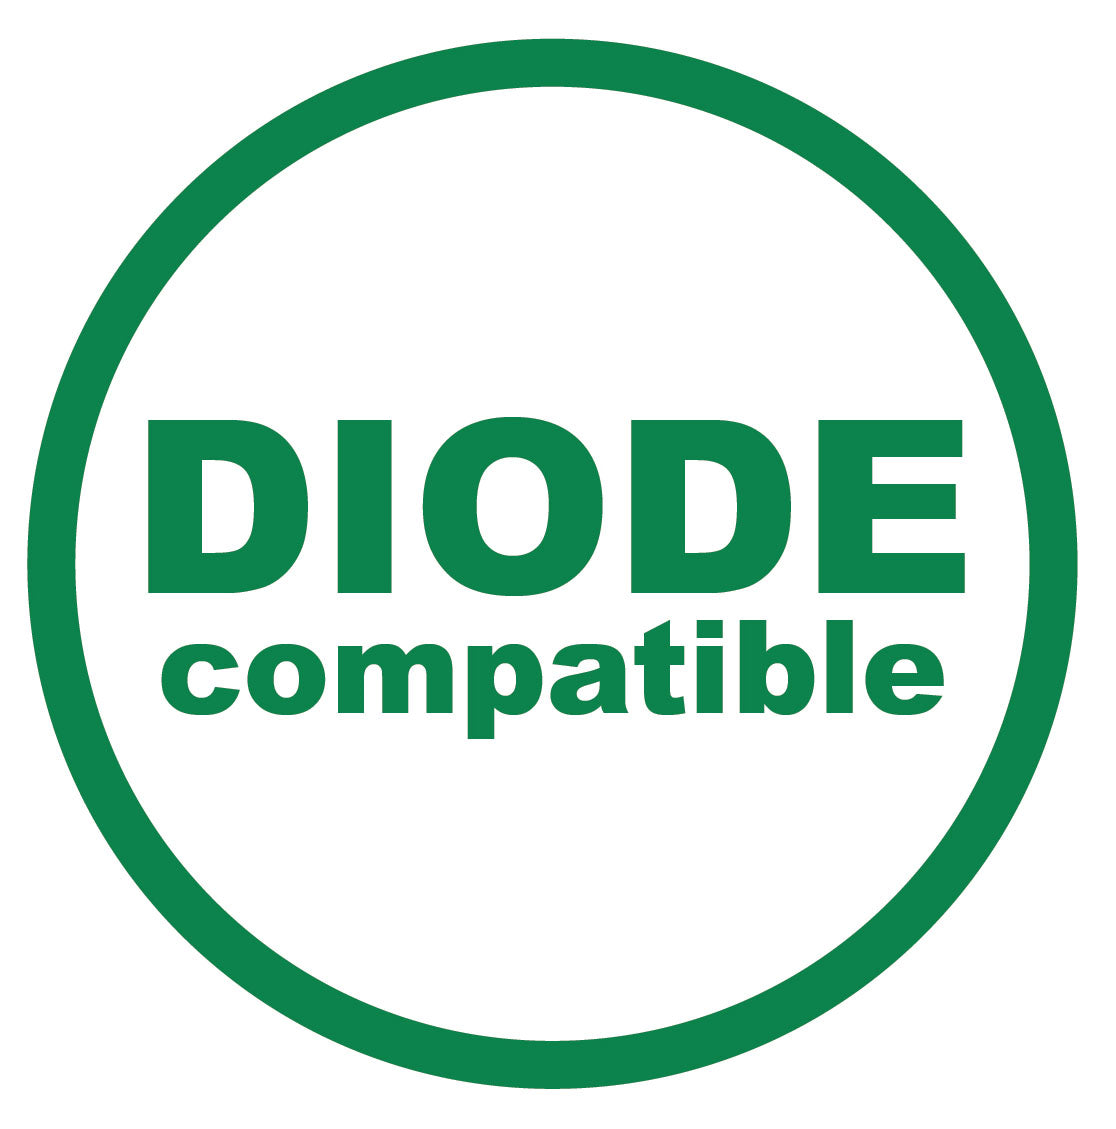 What makes a material Diode Compatible?